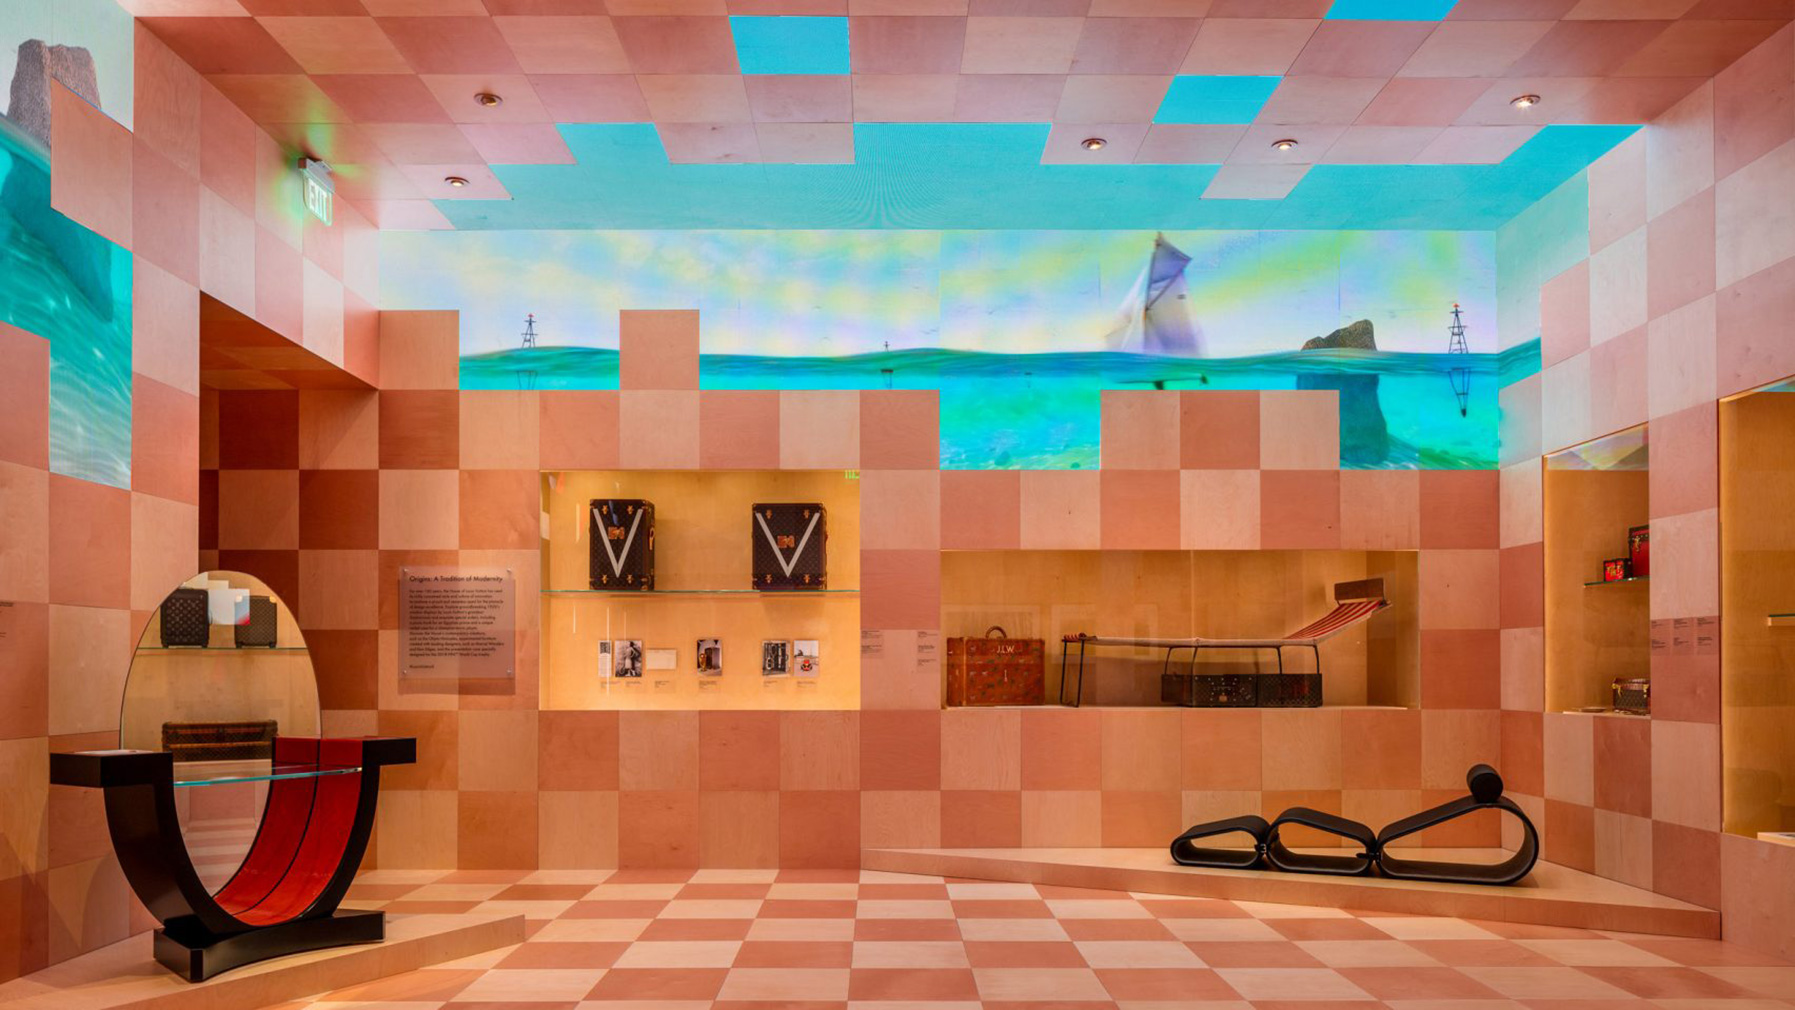 Louis Vuitton’s pop-up museum has landed in Beverly Hills